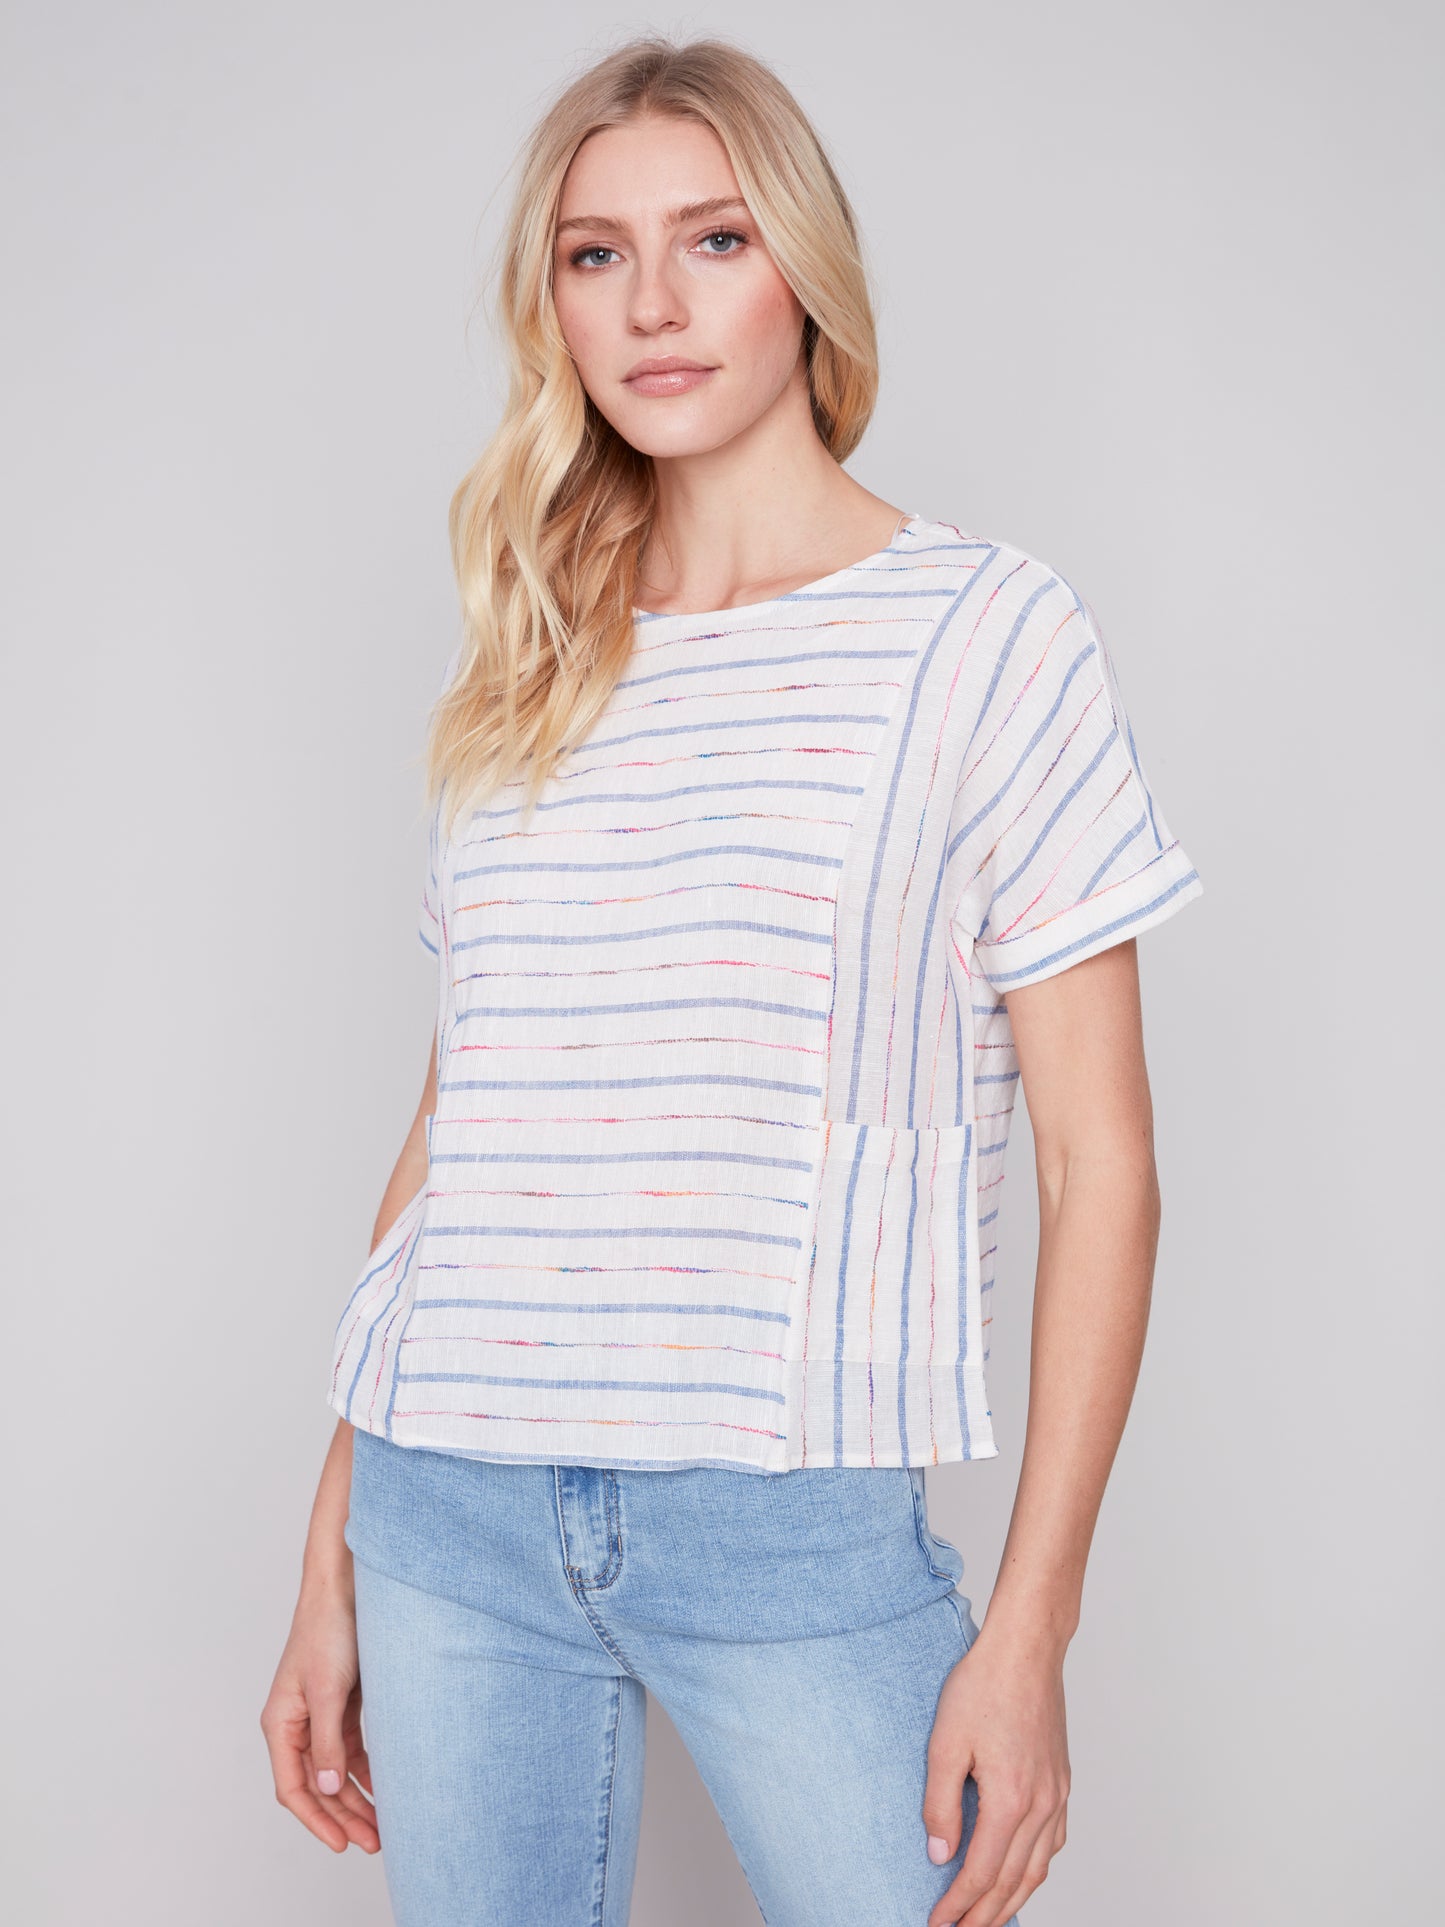 Striped Boxy Top with Pockets by Charlie B